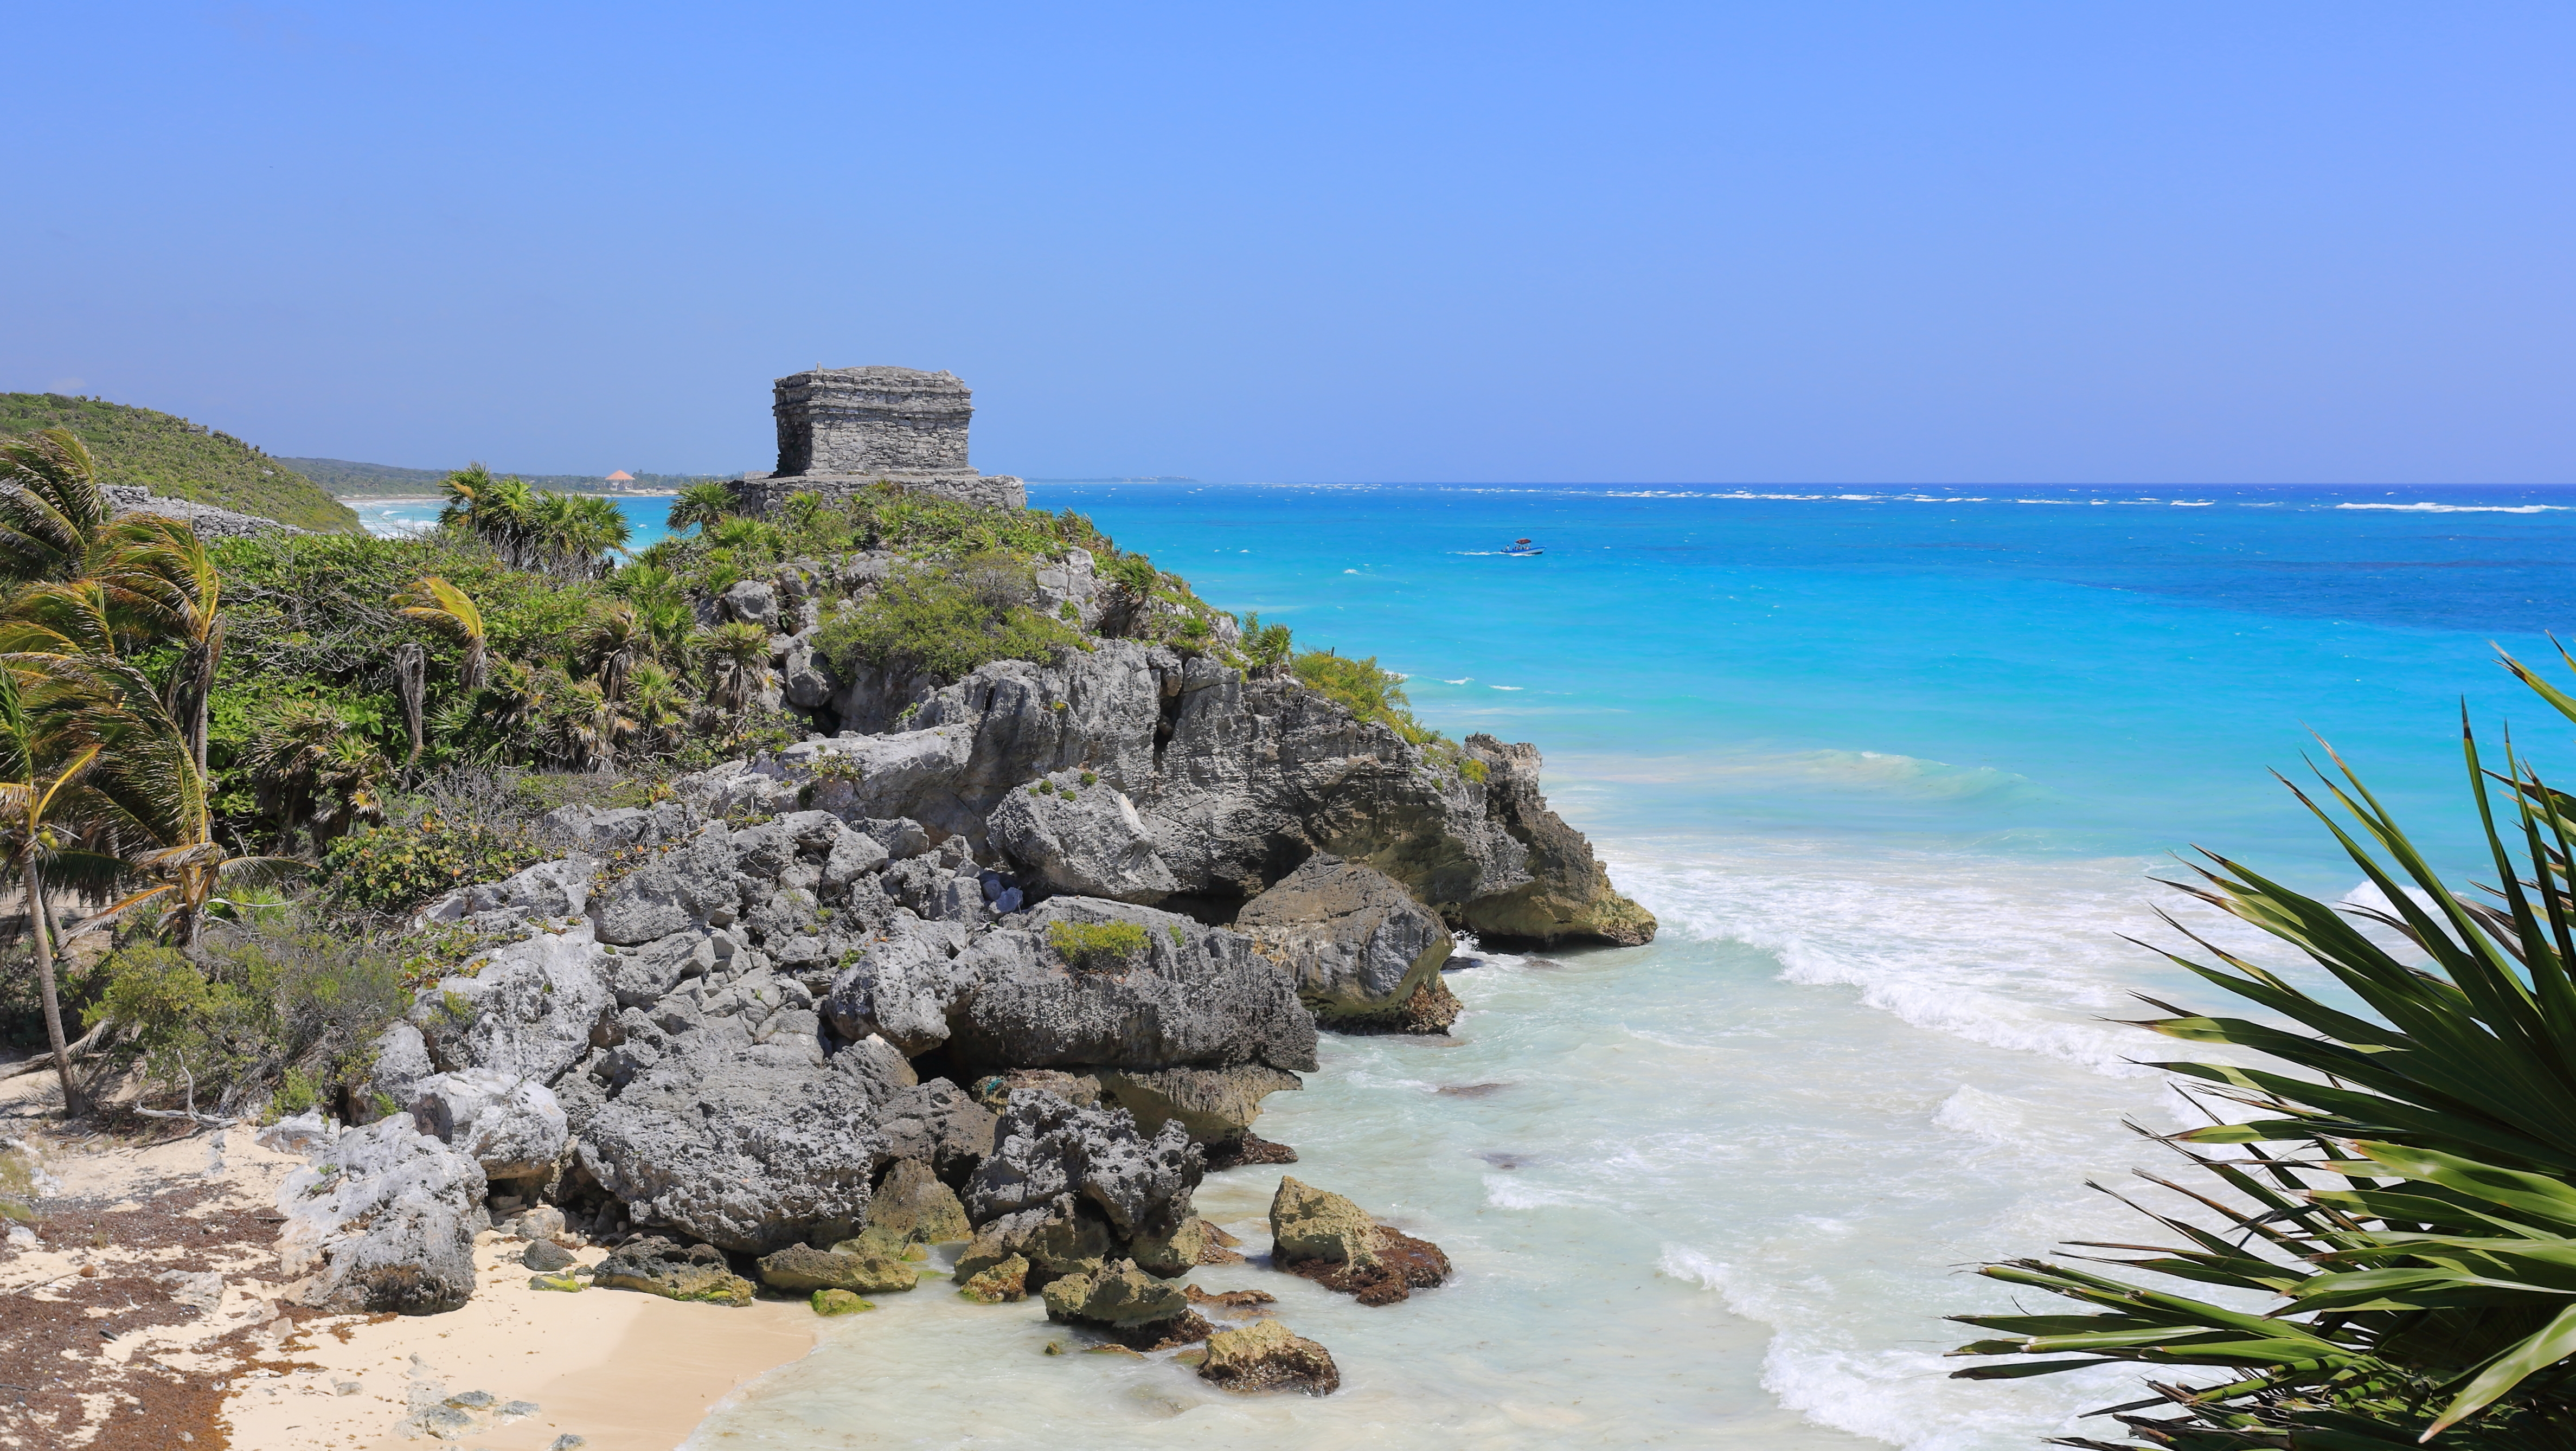 File:Tulum - God of the Winds Temple 03.JPG - Wikimedia Commons